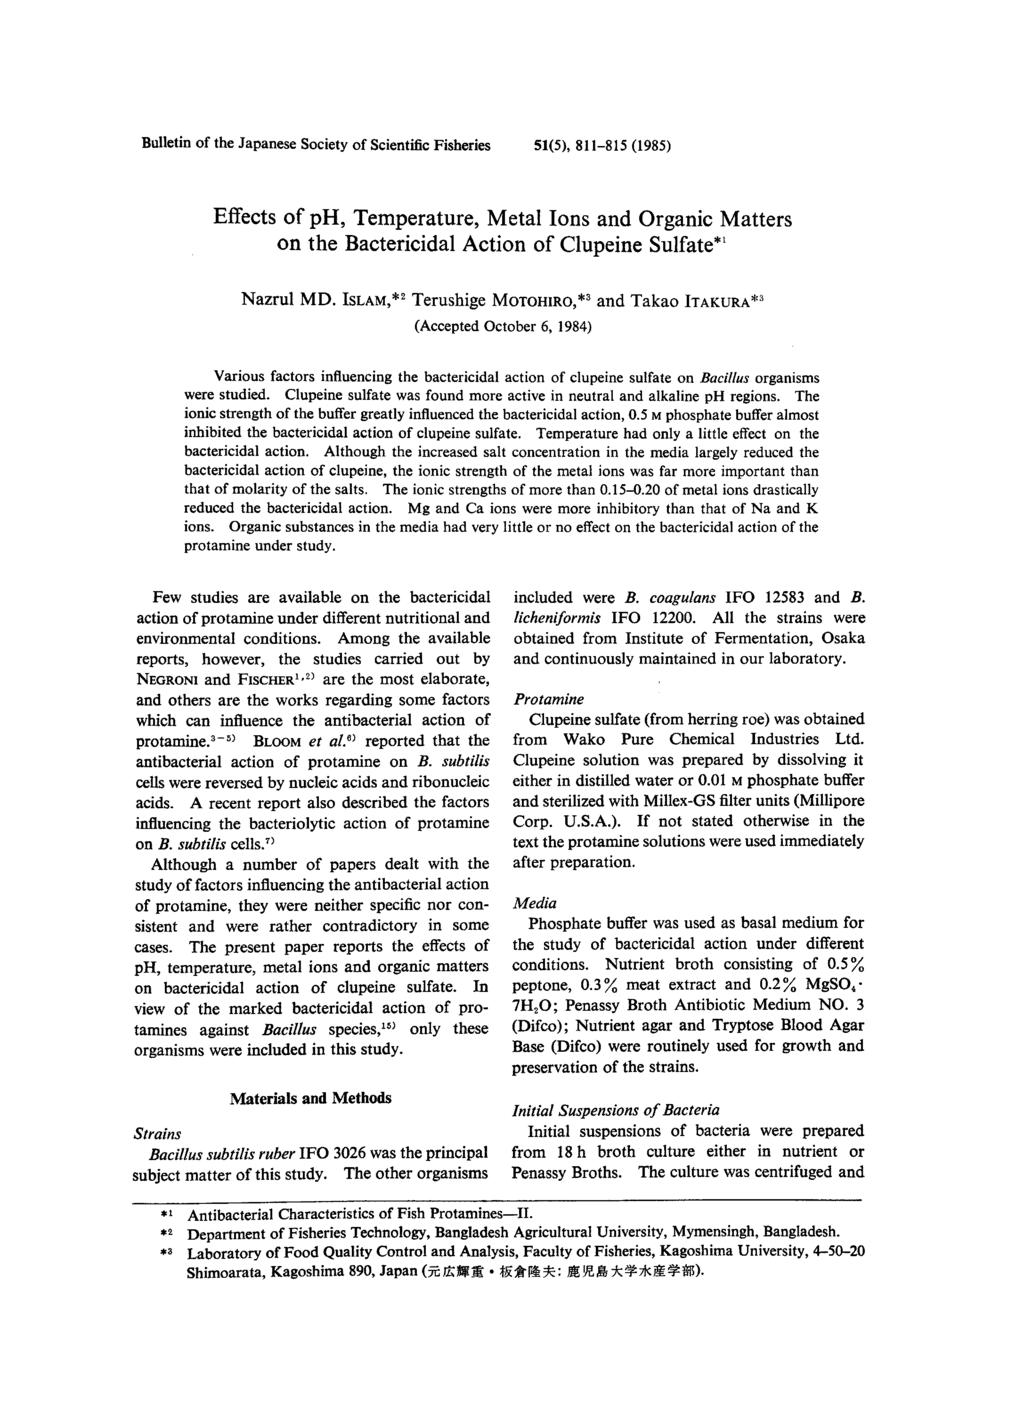 Bulletin of the Japanese Society of Scientific Fisheries 51(5), 811-815 (1985) Effects of ph, Temperature, Metal Ions and Organic Matters on the Bactericidal Action of Clupeine Sulfate*1 Nazrul MD.